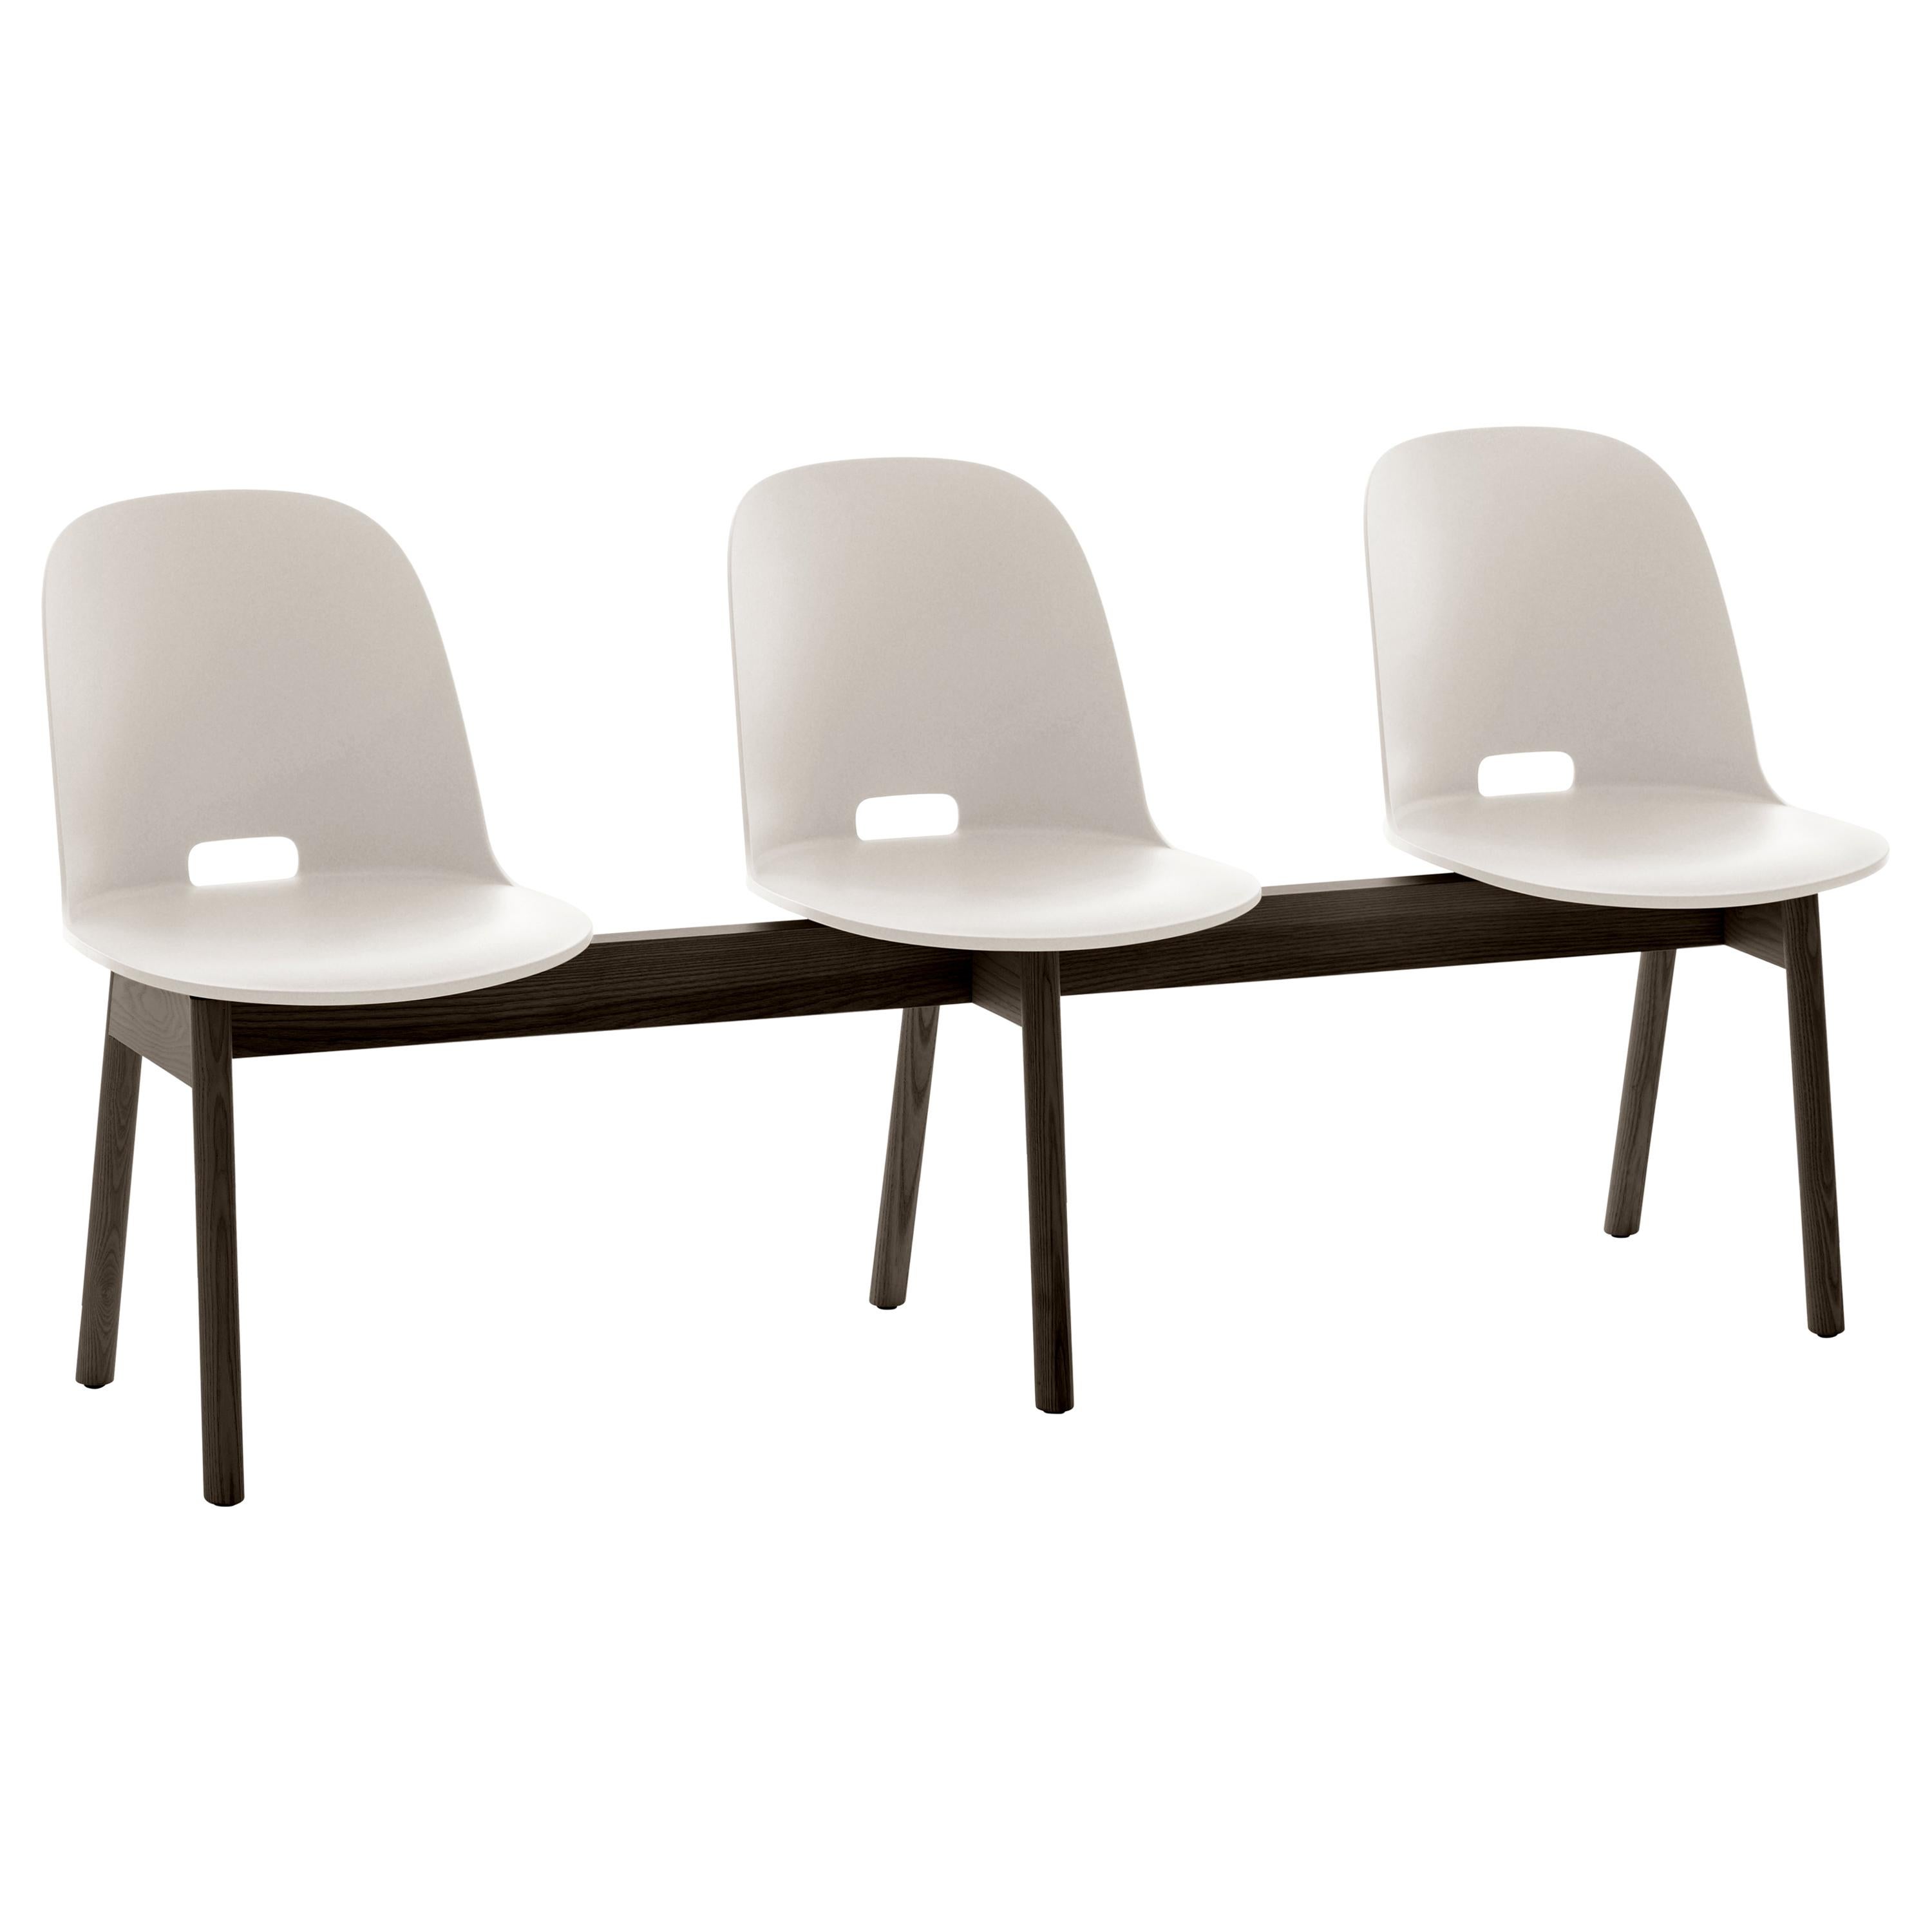 Emeco Alfi 3-Seat Bench in White and Dark Ash with High Back by Jasper Morrison